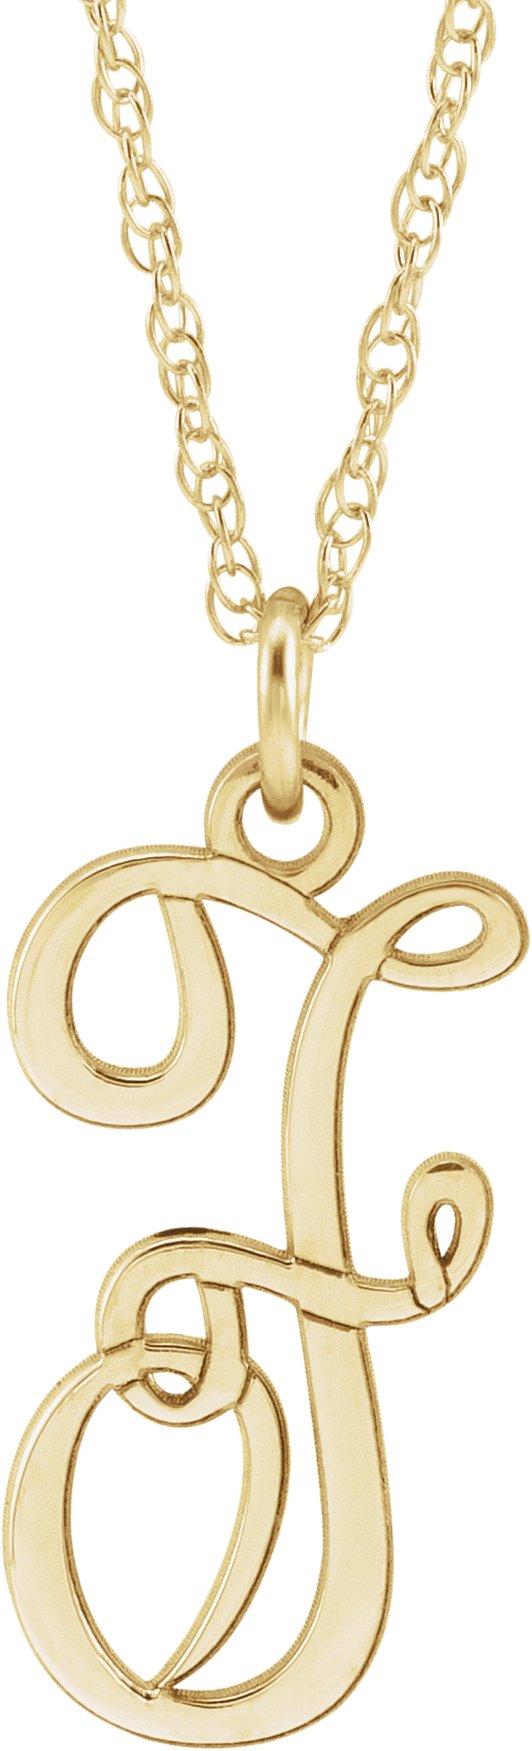 14K Yellow Gold-Plated Sterling Silver Script Initial F 16-18" Necklace